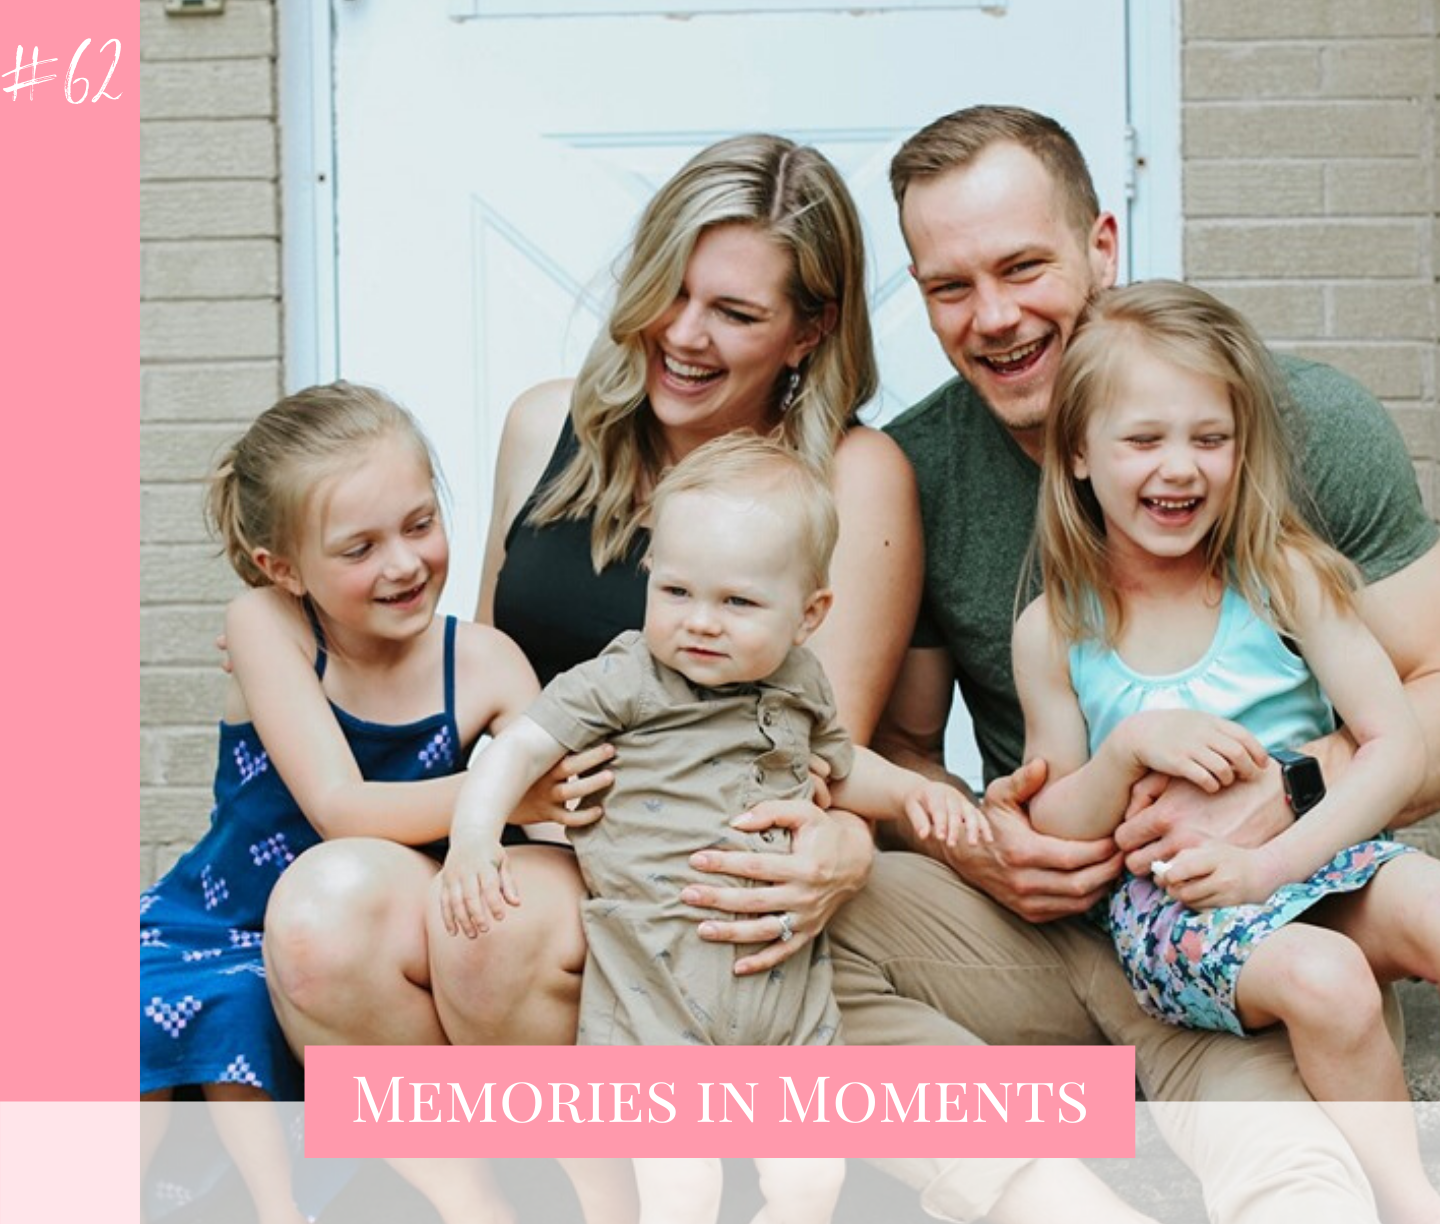 The Behavior Change Collective shares their tips for getting kids to listen, stop whining and how to change unwanted behaviors in your home in this Memories in Moments podcast episode.